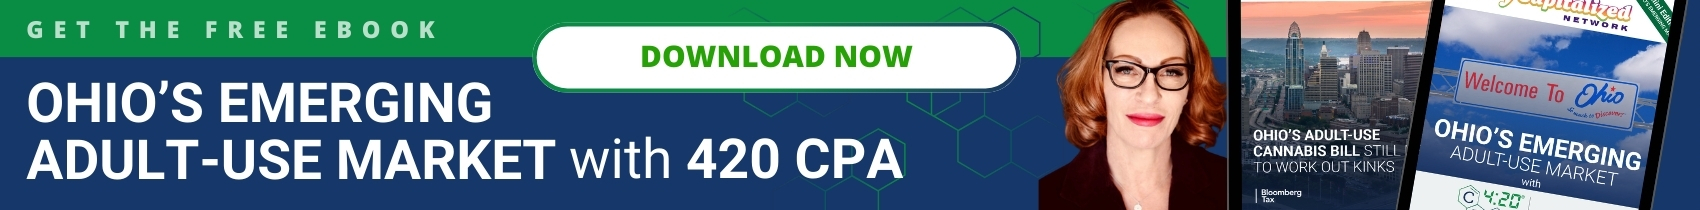 DOWNLOAD THE NEW EBOOK OHIO Adult Use Market WITH 420CPA